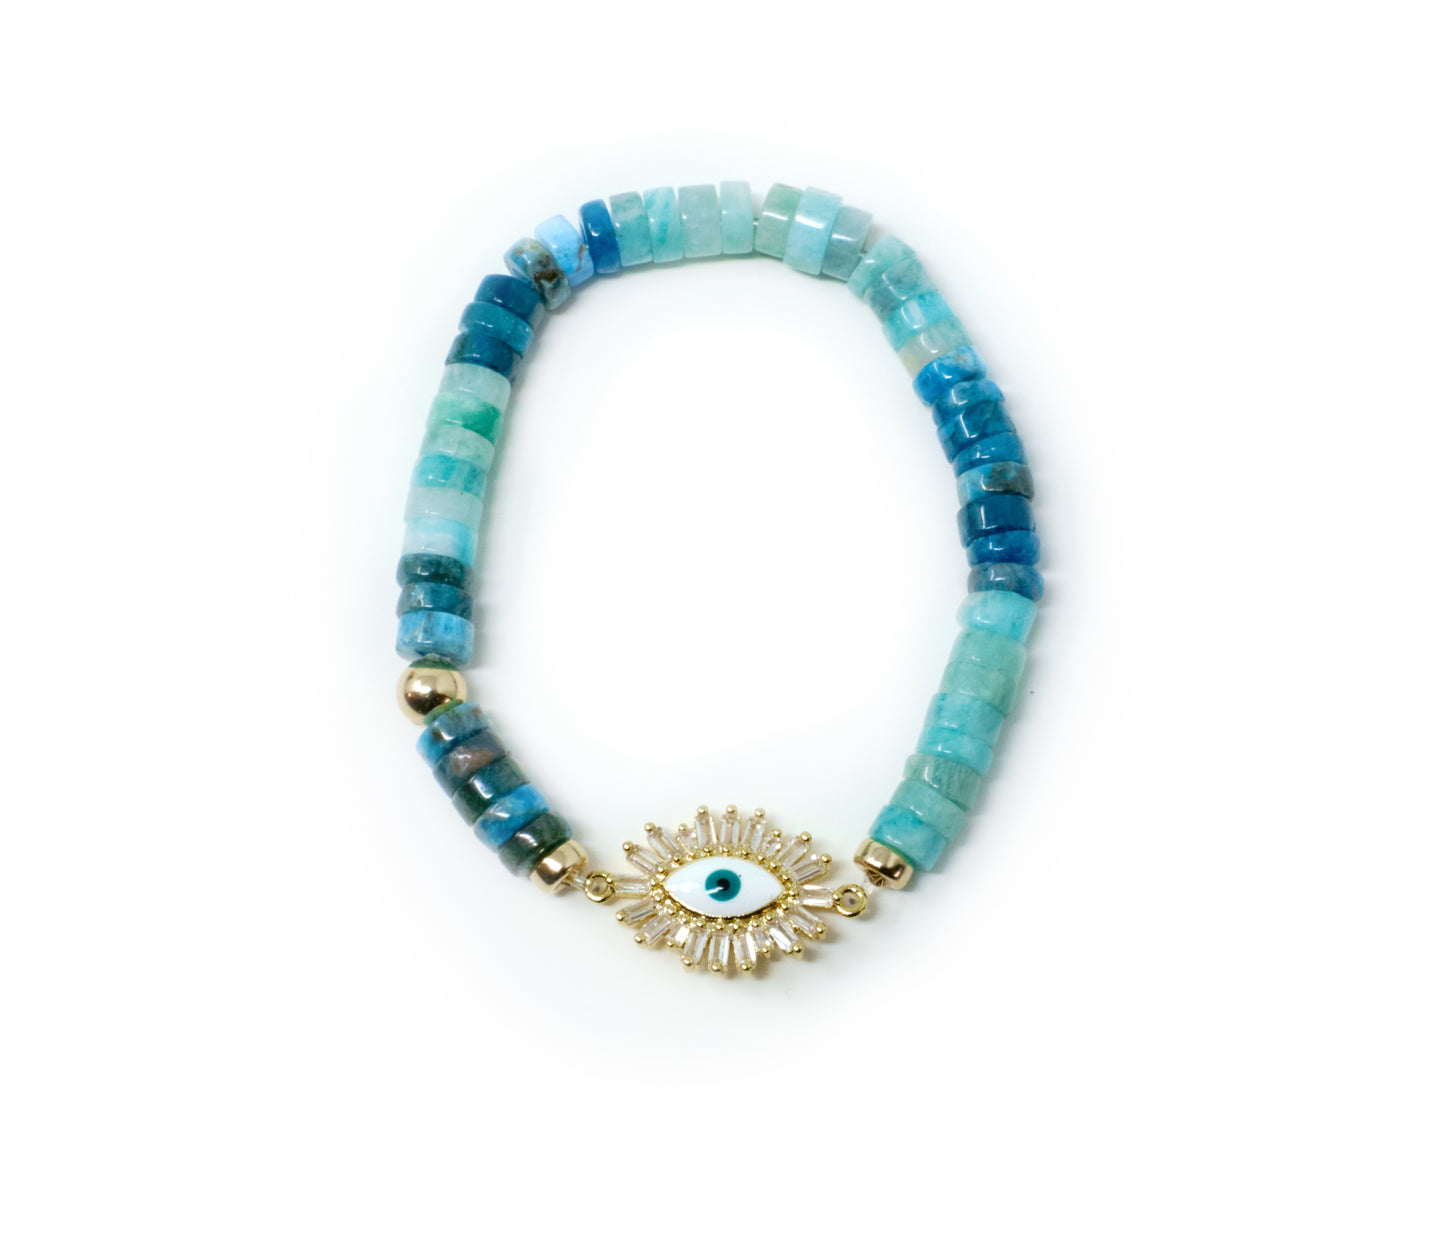 MOTIVATE + PERFECTLY ME Blue Apatite and Amazonite Eye of Protection 14k Gold-Filled Bracelet